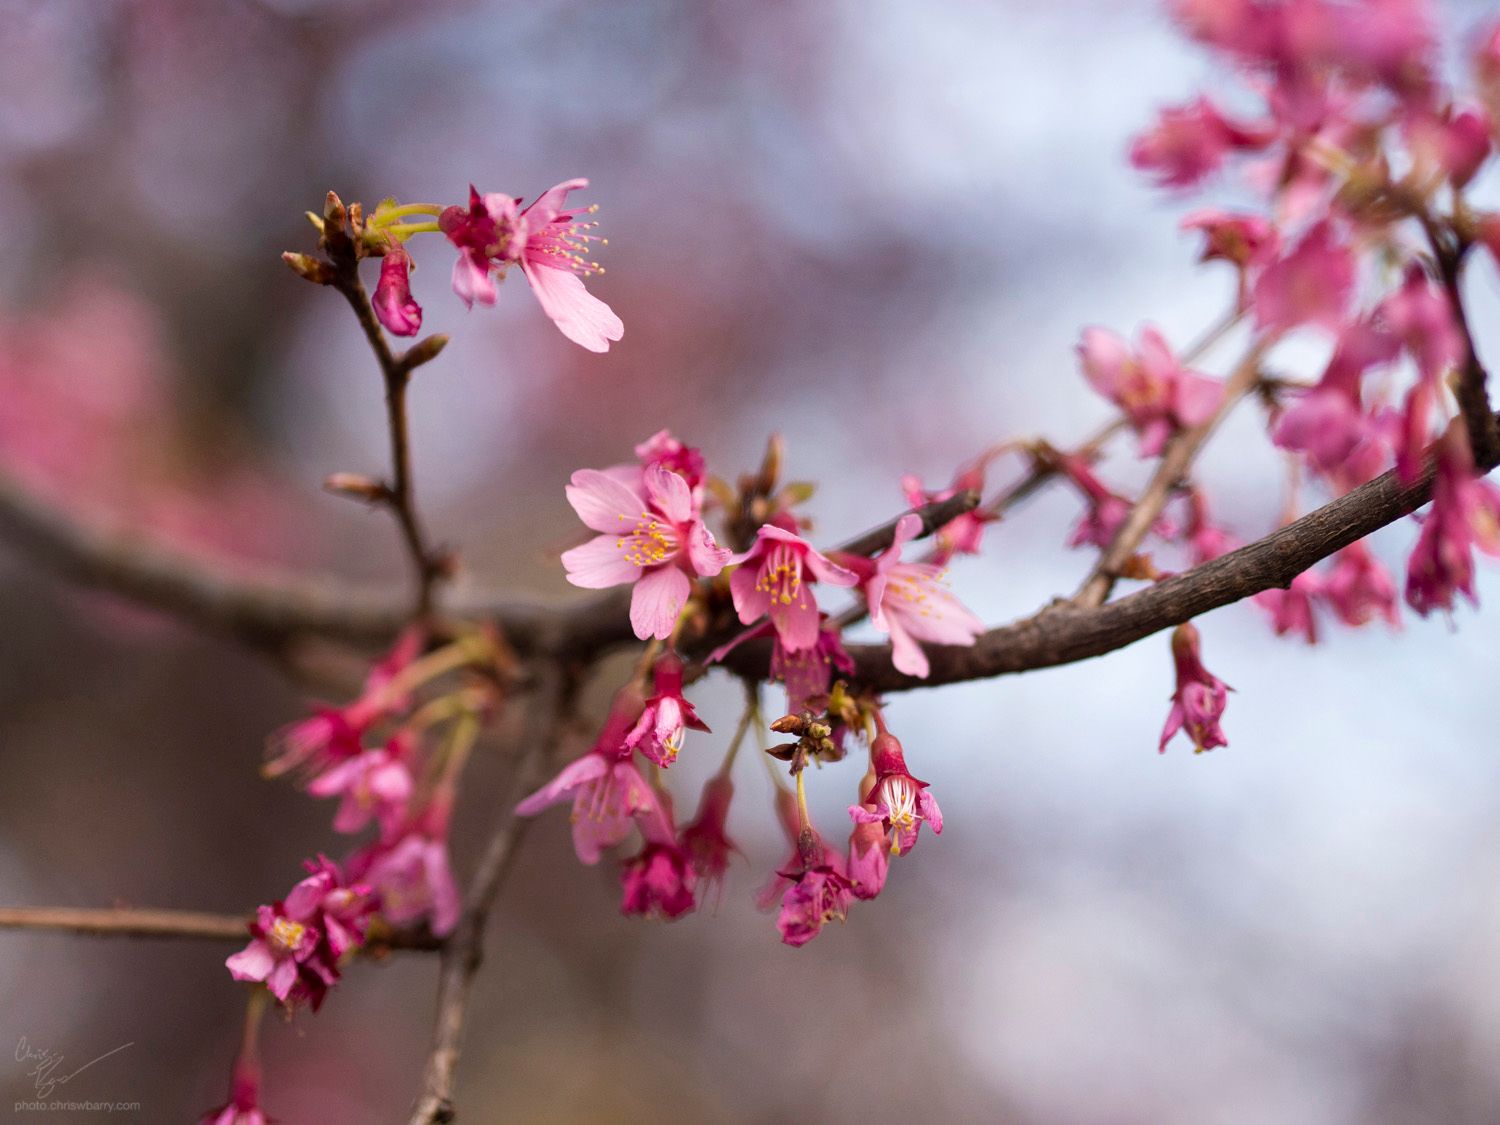 A close up photograph of a branch of cherry blossoms. Much of the image is out of focus.